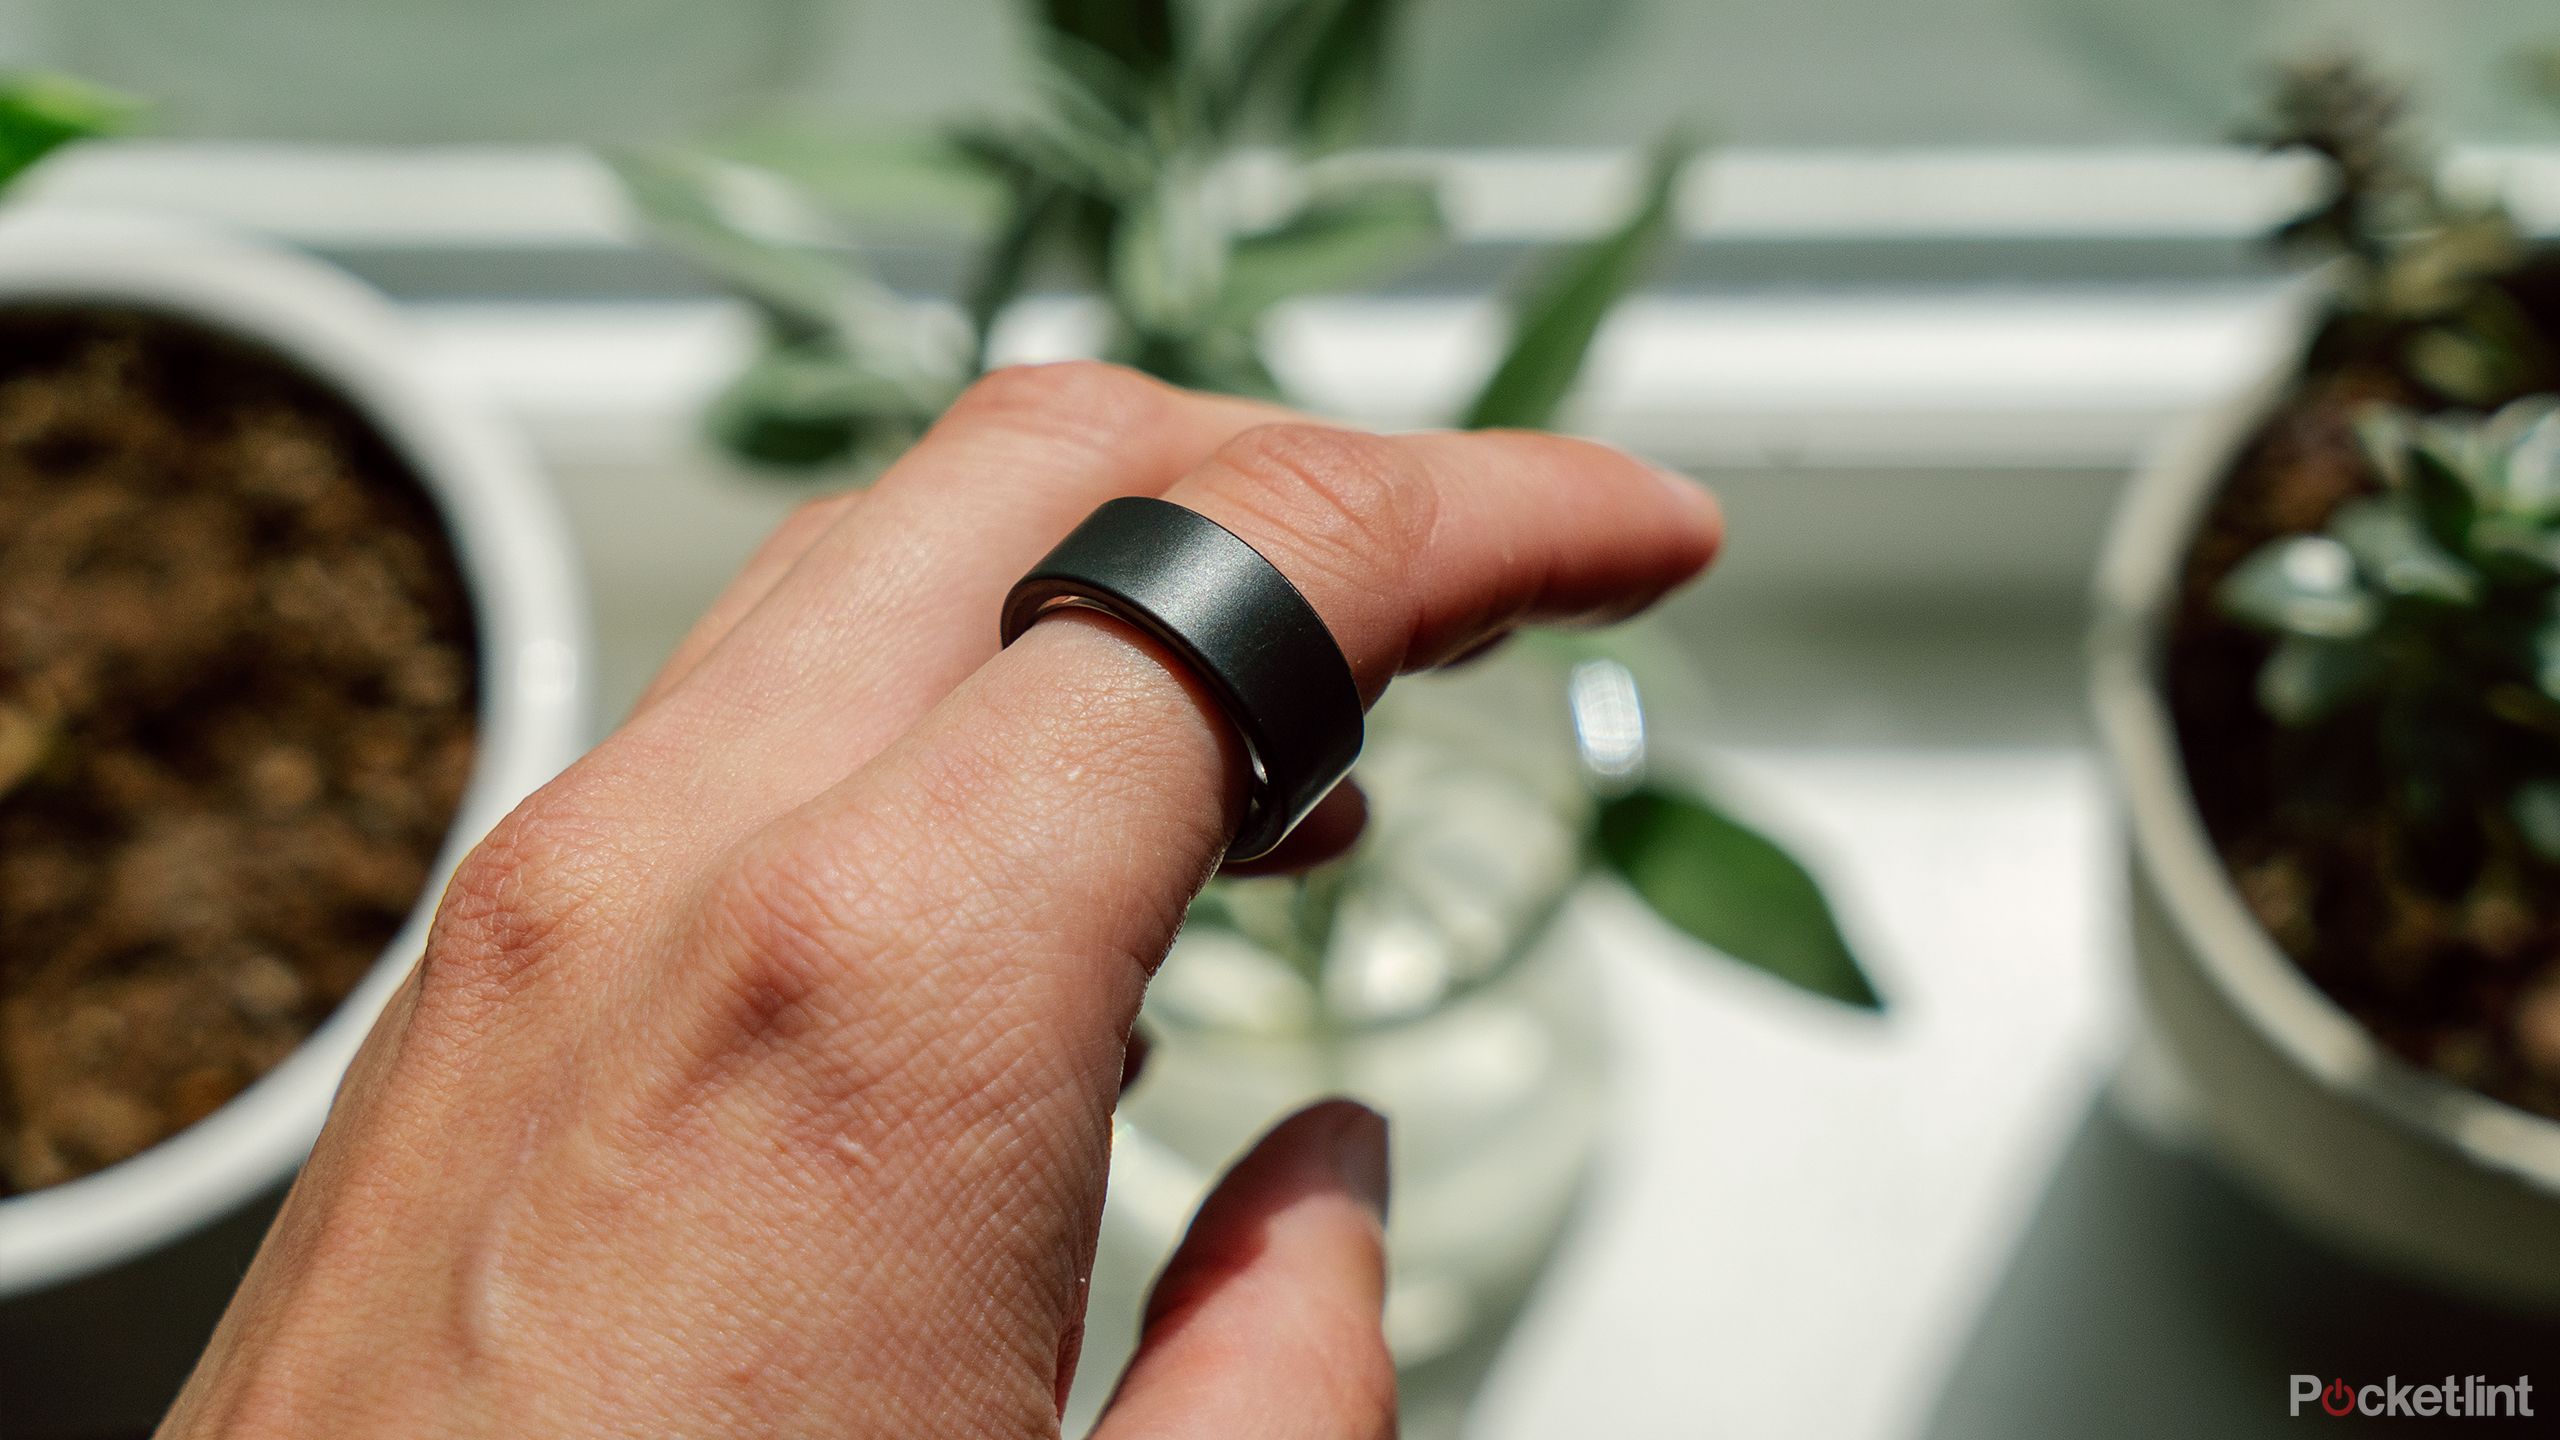 The Ultrahuman Ring Air on a finger held in front of a blurred out windowsill with plants. 